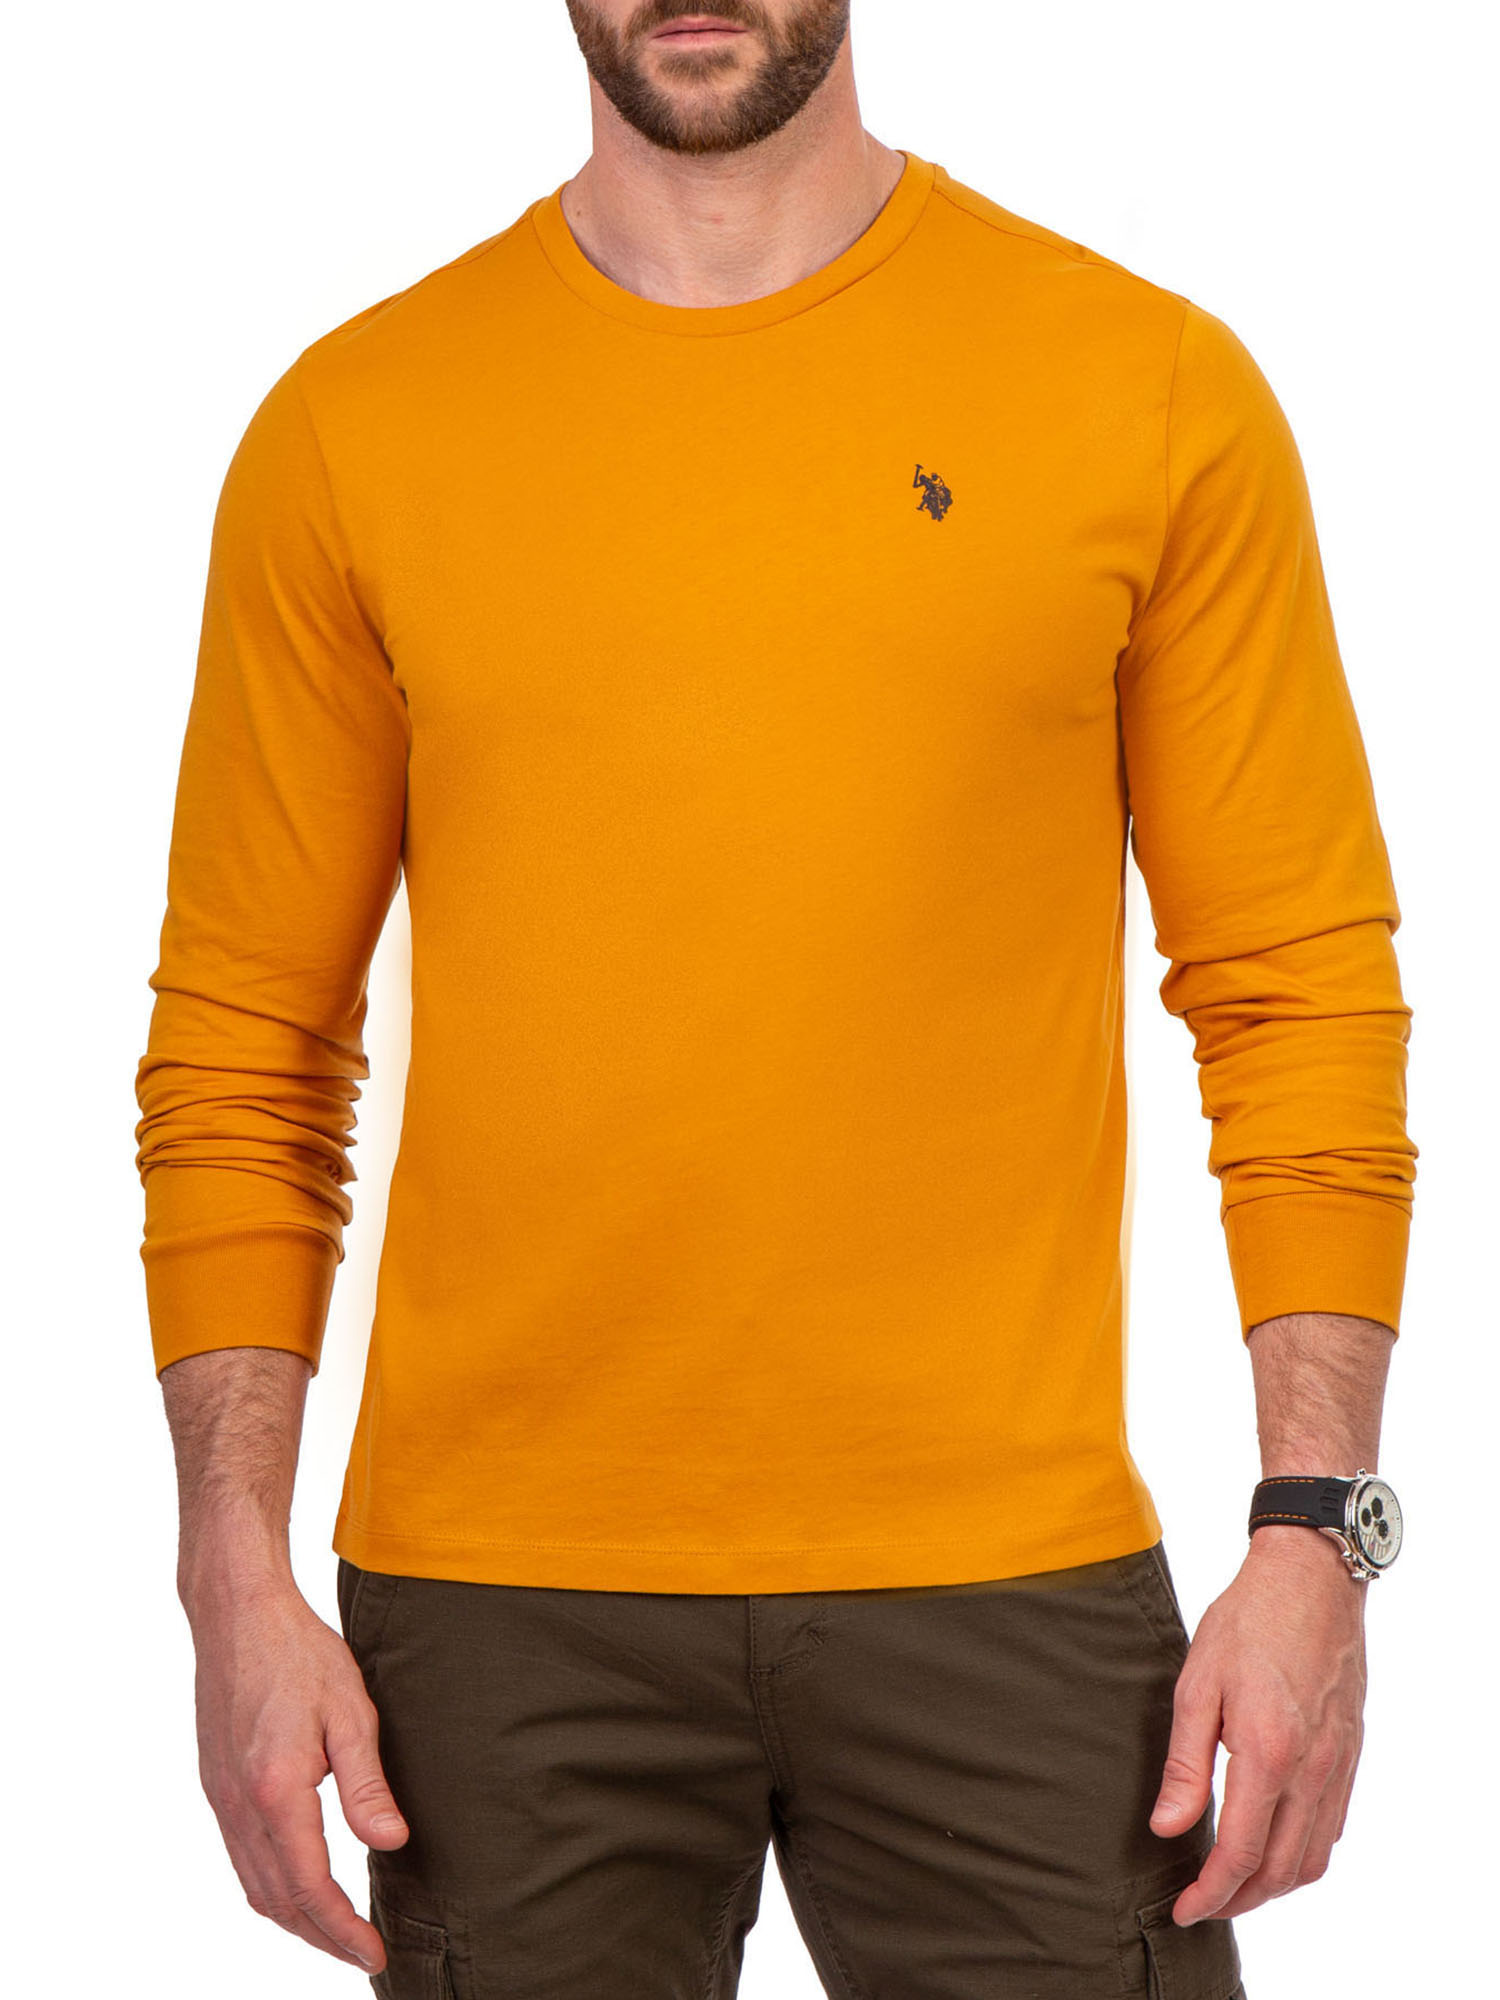 U.S. Polo Assn. Men's Long Sleeve Solid T-Shirt - image 1 of 4